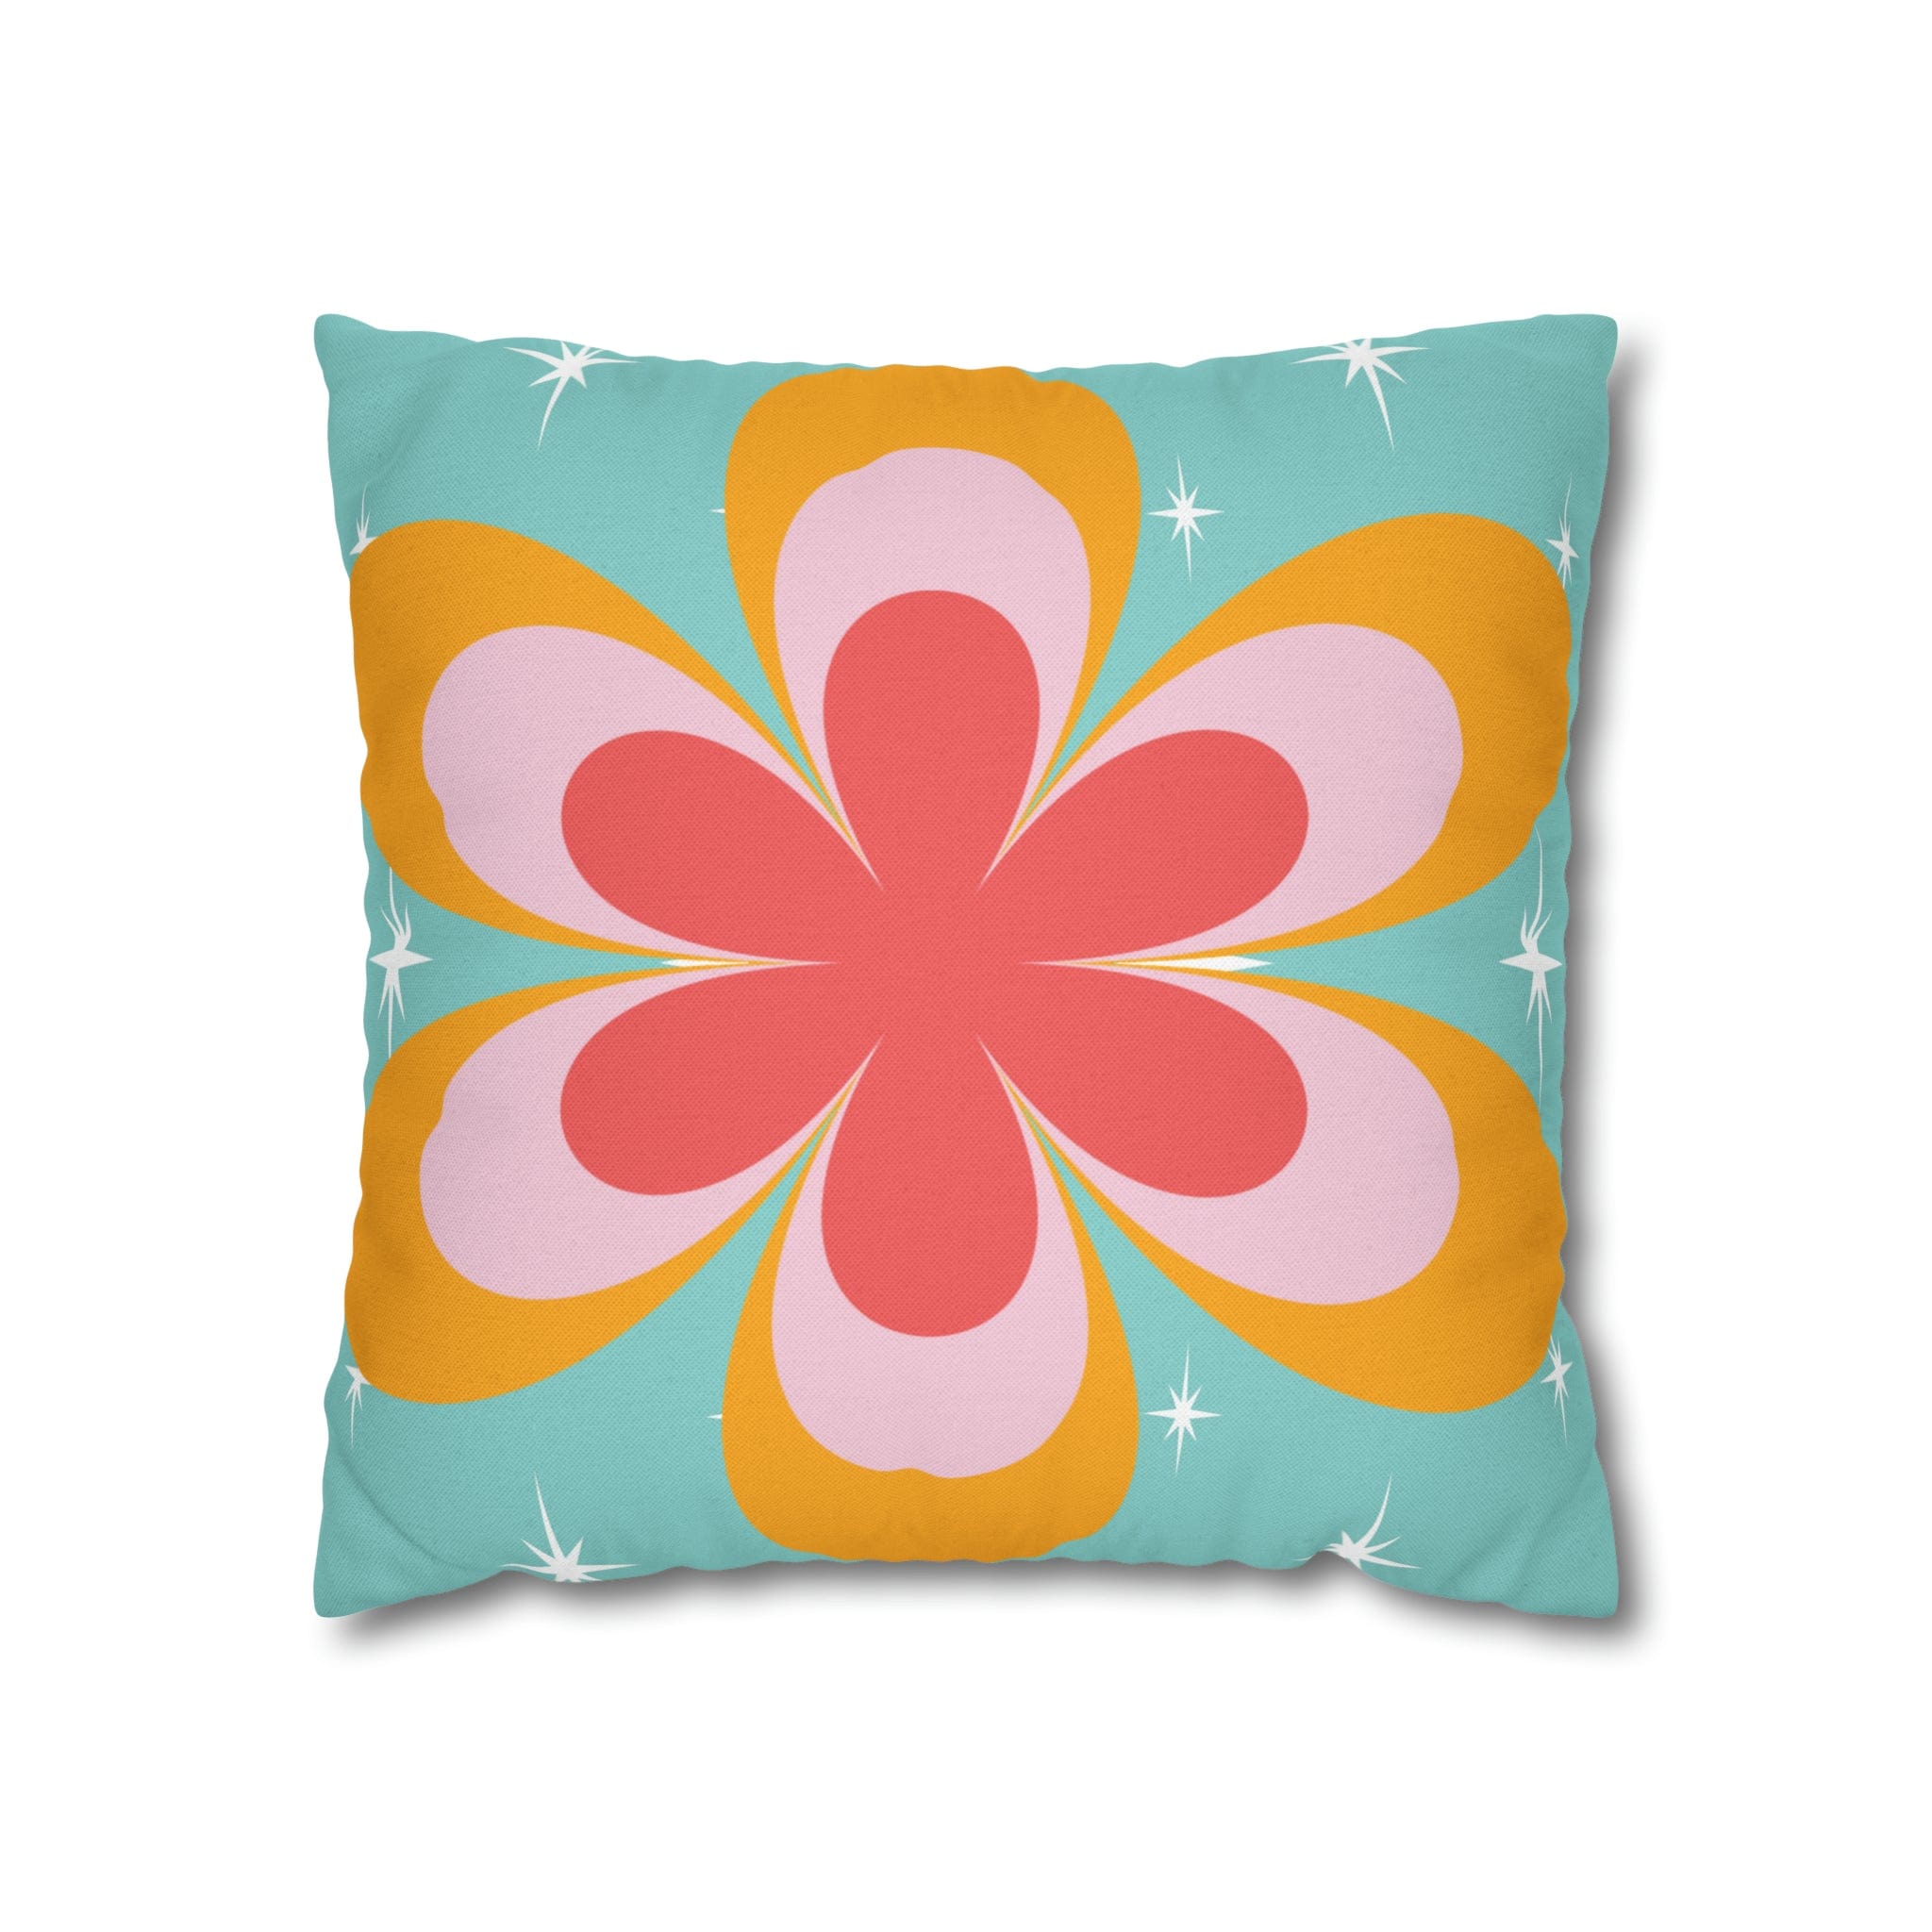 Printify Retro Groovy Daisy Flower Power Throw Pillowcase, Mid Century Modern Starburst Coral, Aqua Blue, Mustard Yellow Accent Pillow Cover Home Decor 16&quot; × 16&quot; 24534997349537729516